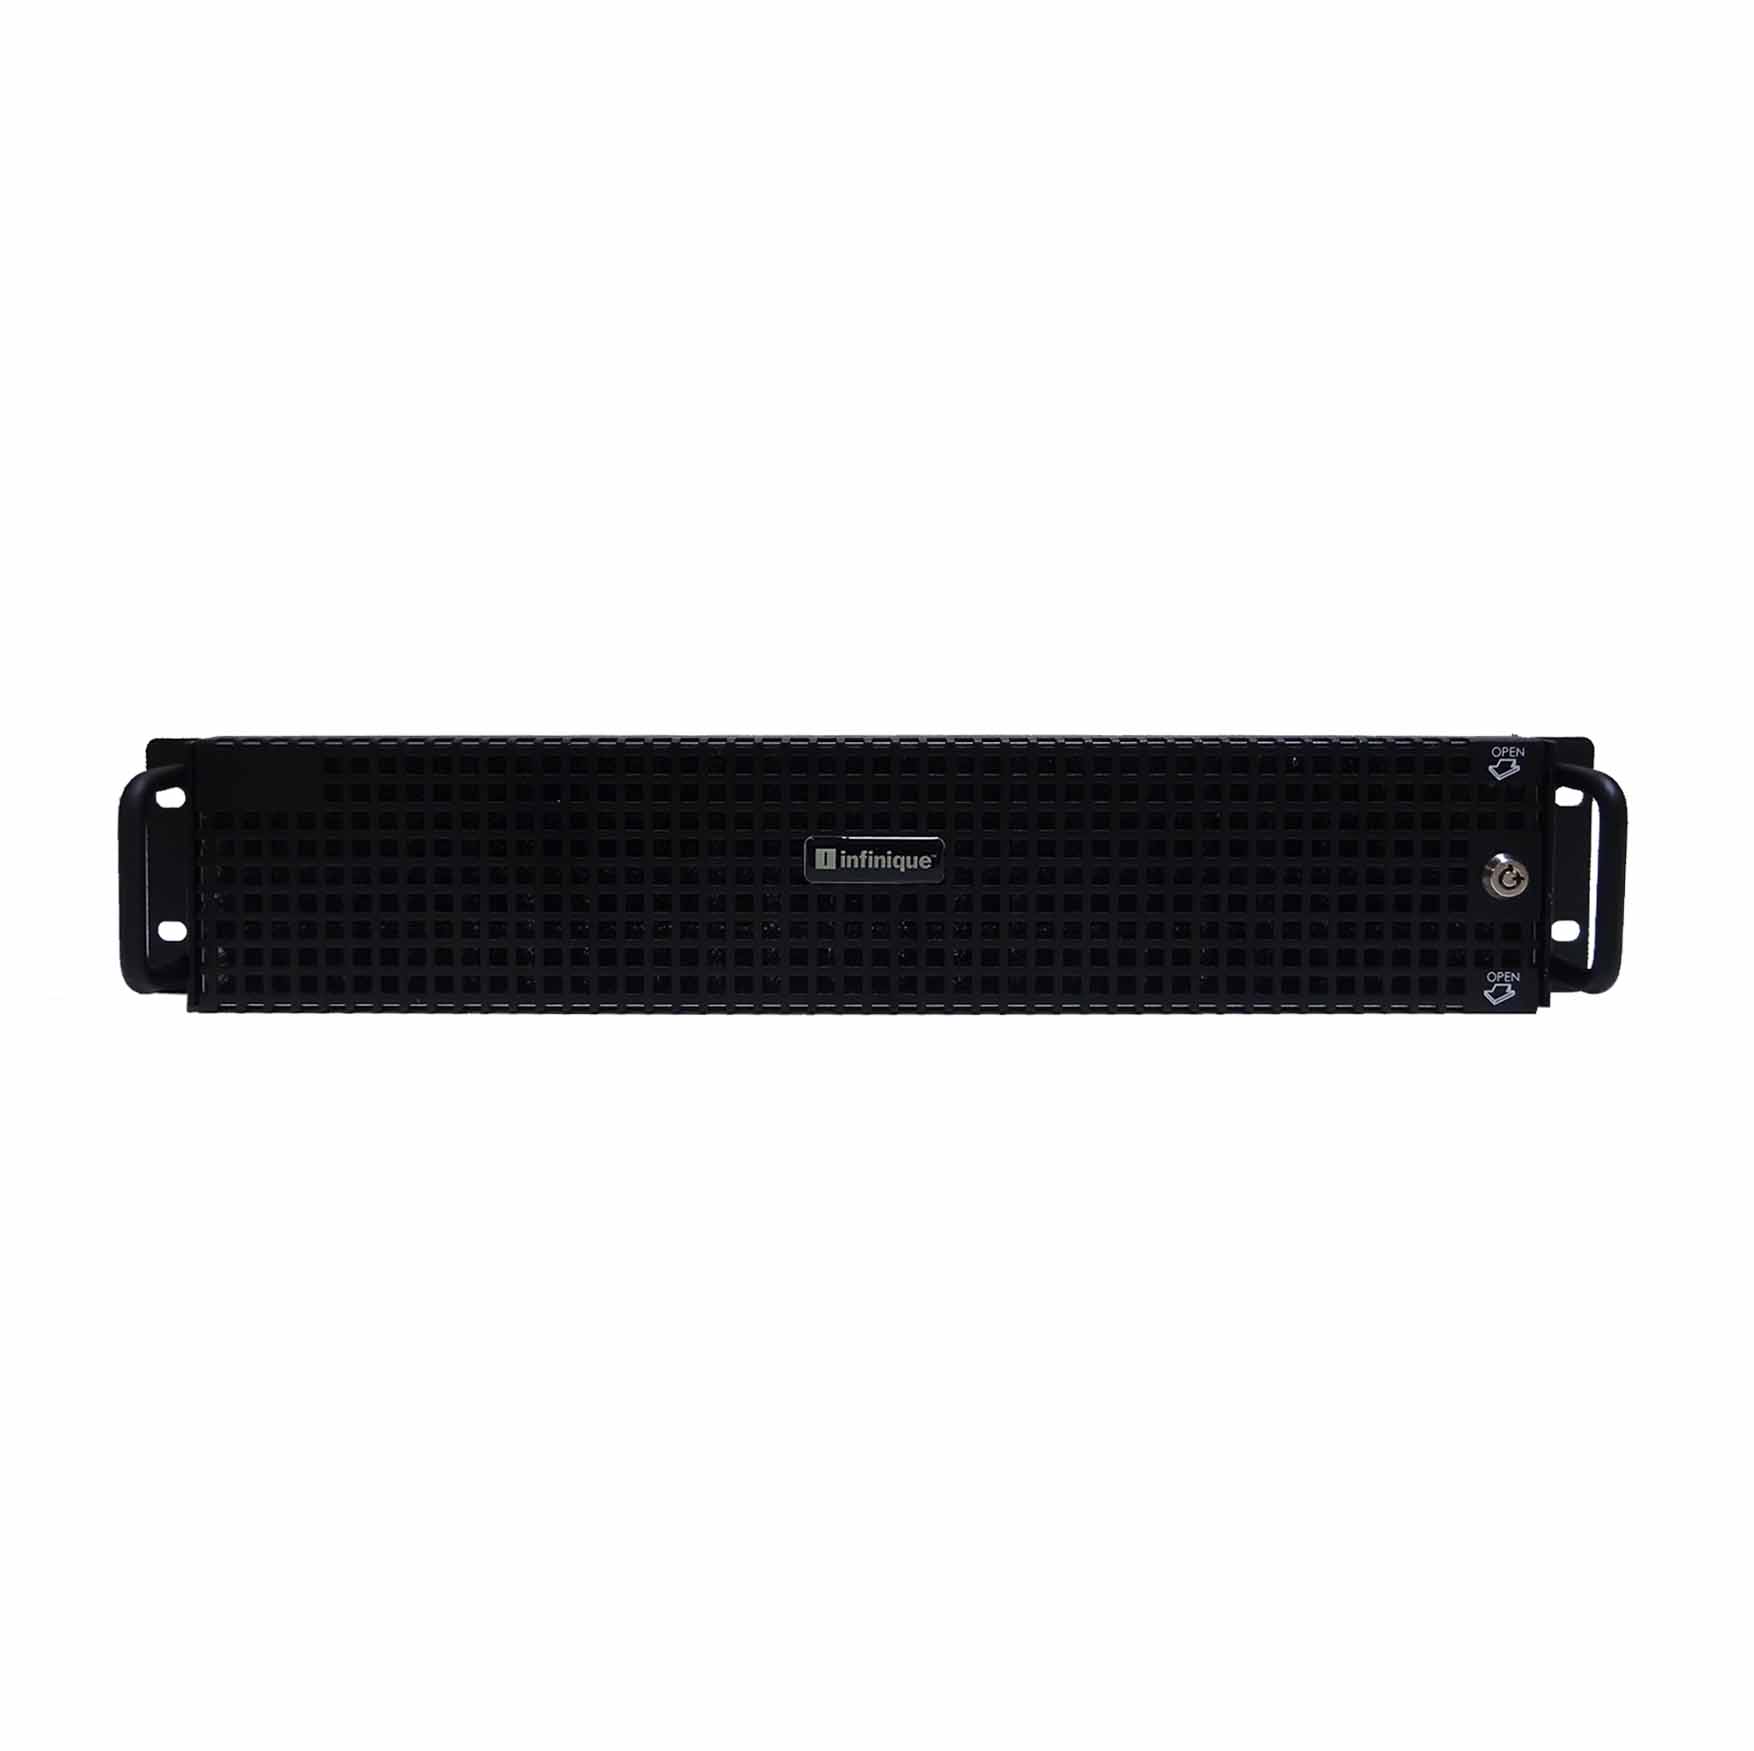 Infinique 64Ch Fortes NVR Professional Series